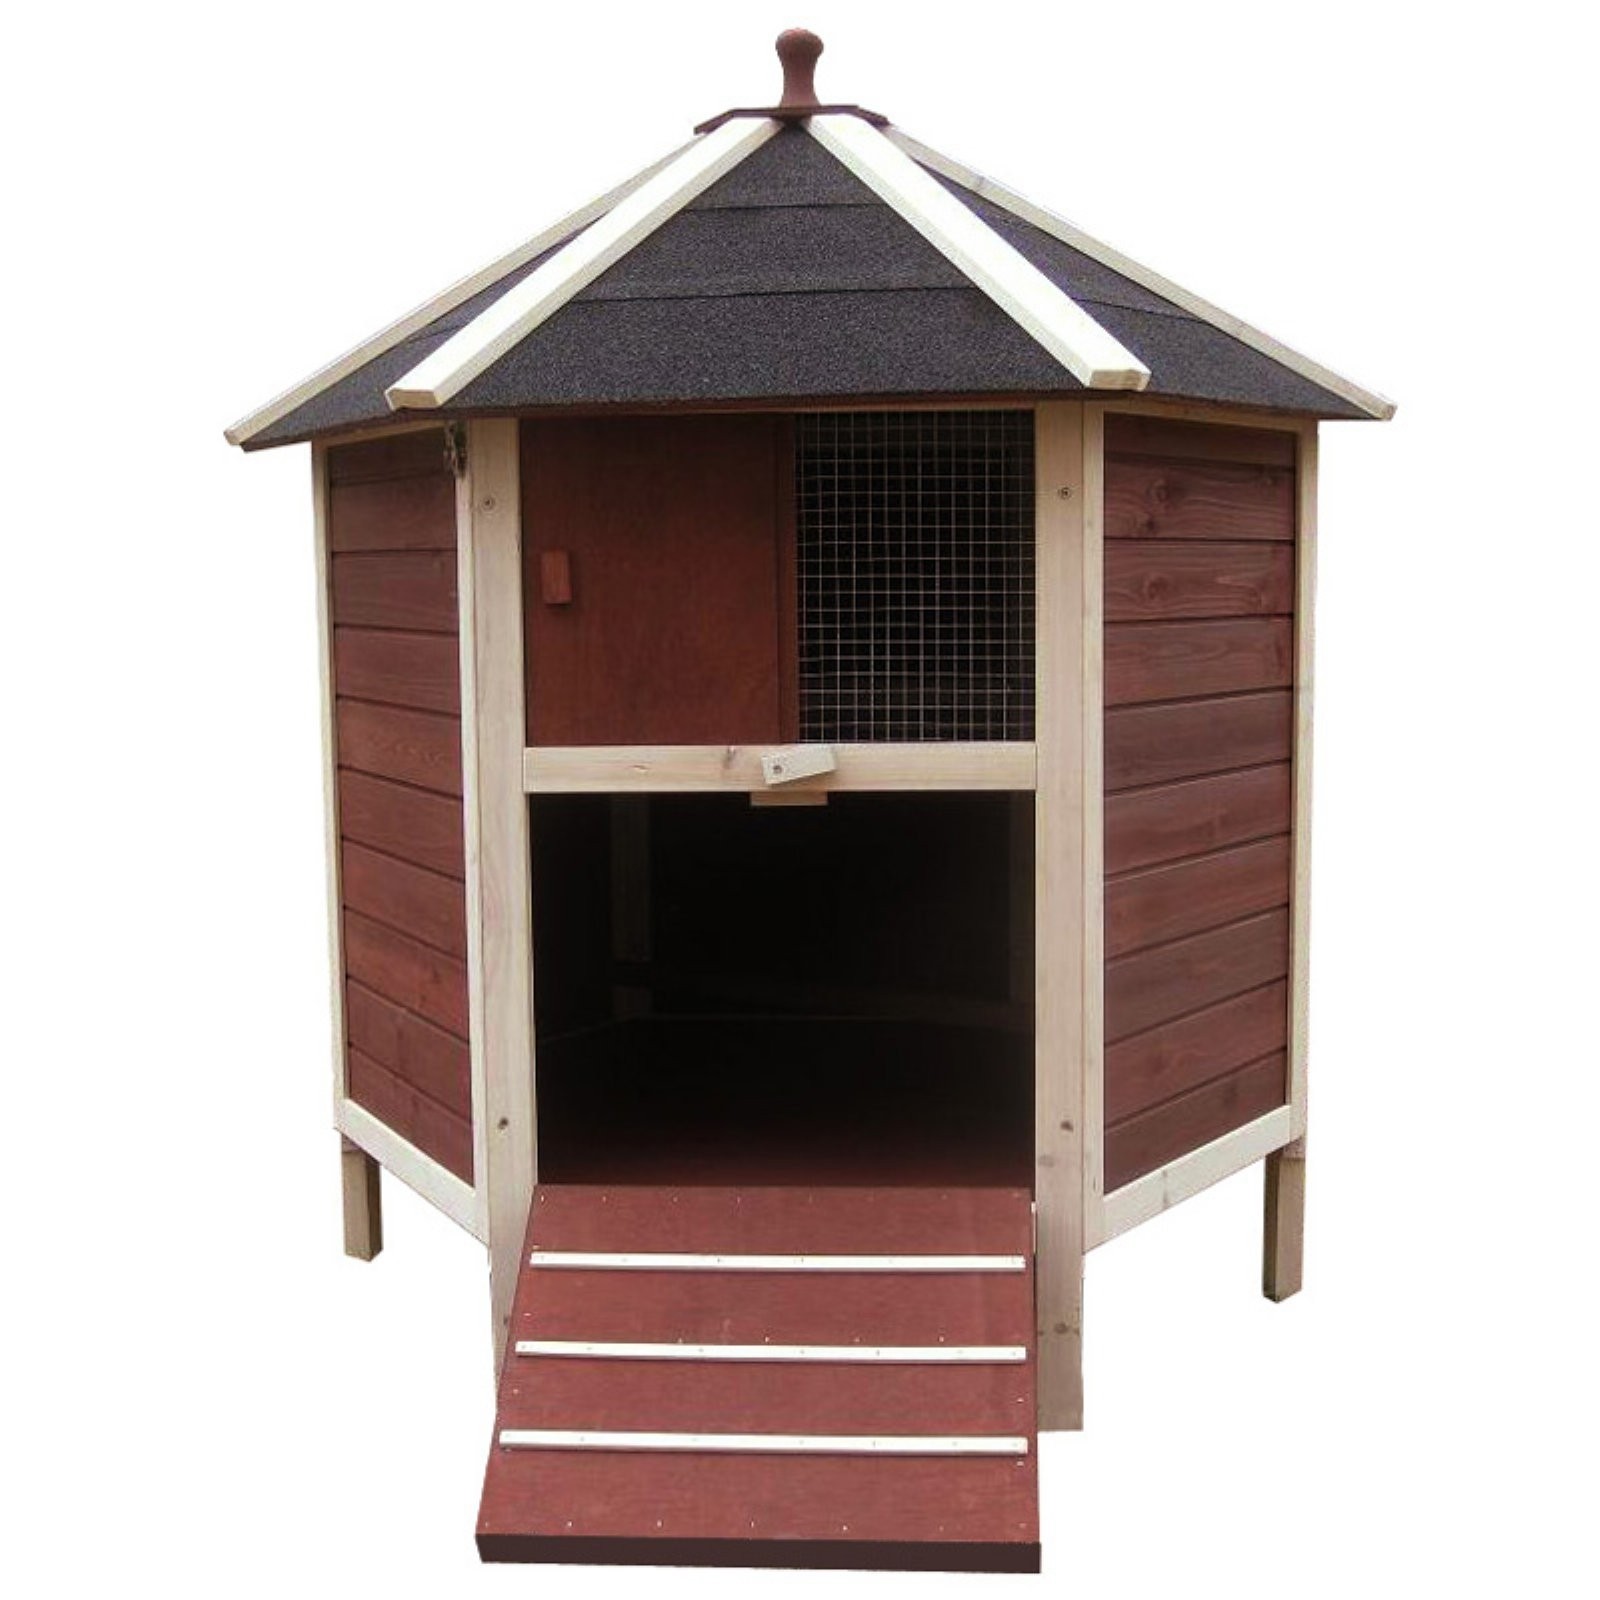 The Tower Poultry Chicken House with Nesting Box